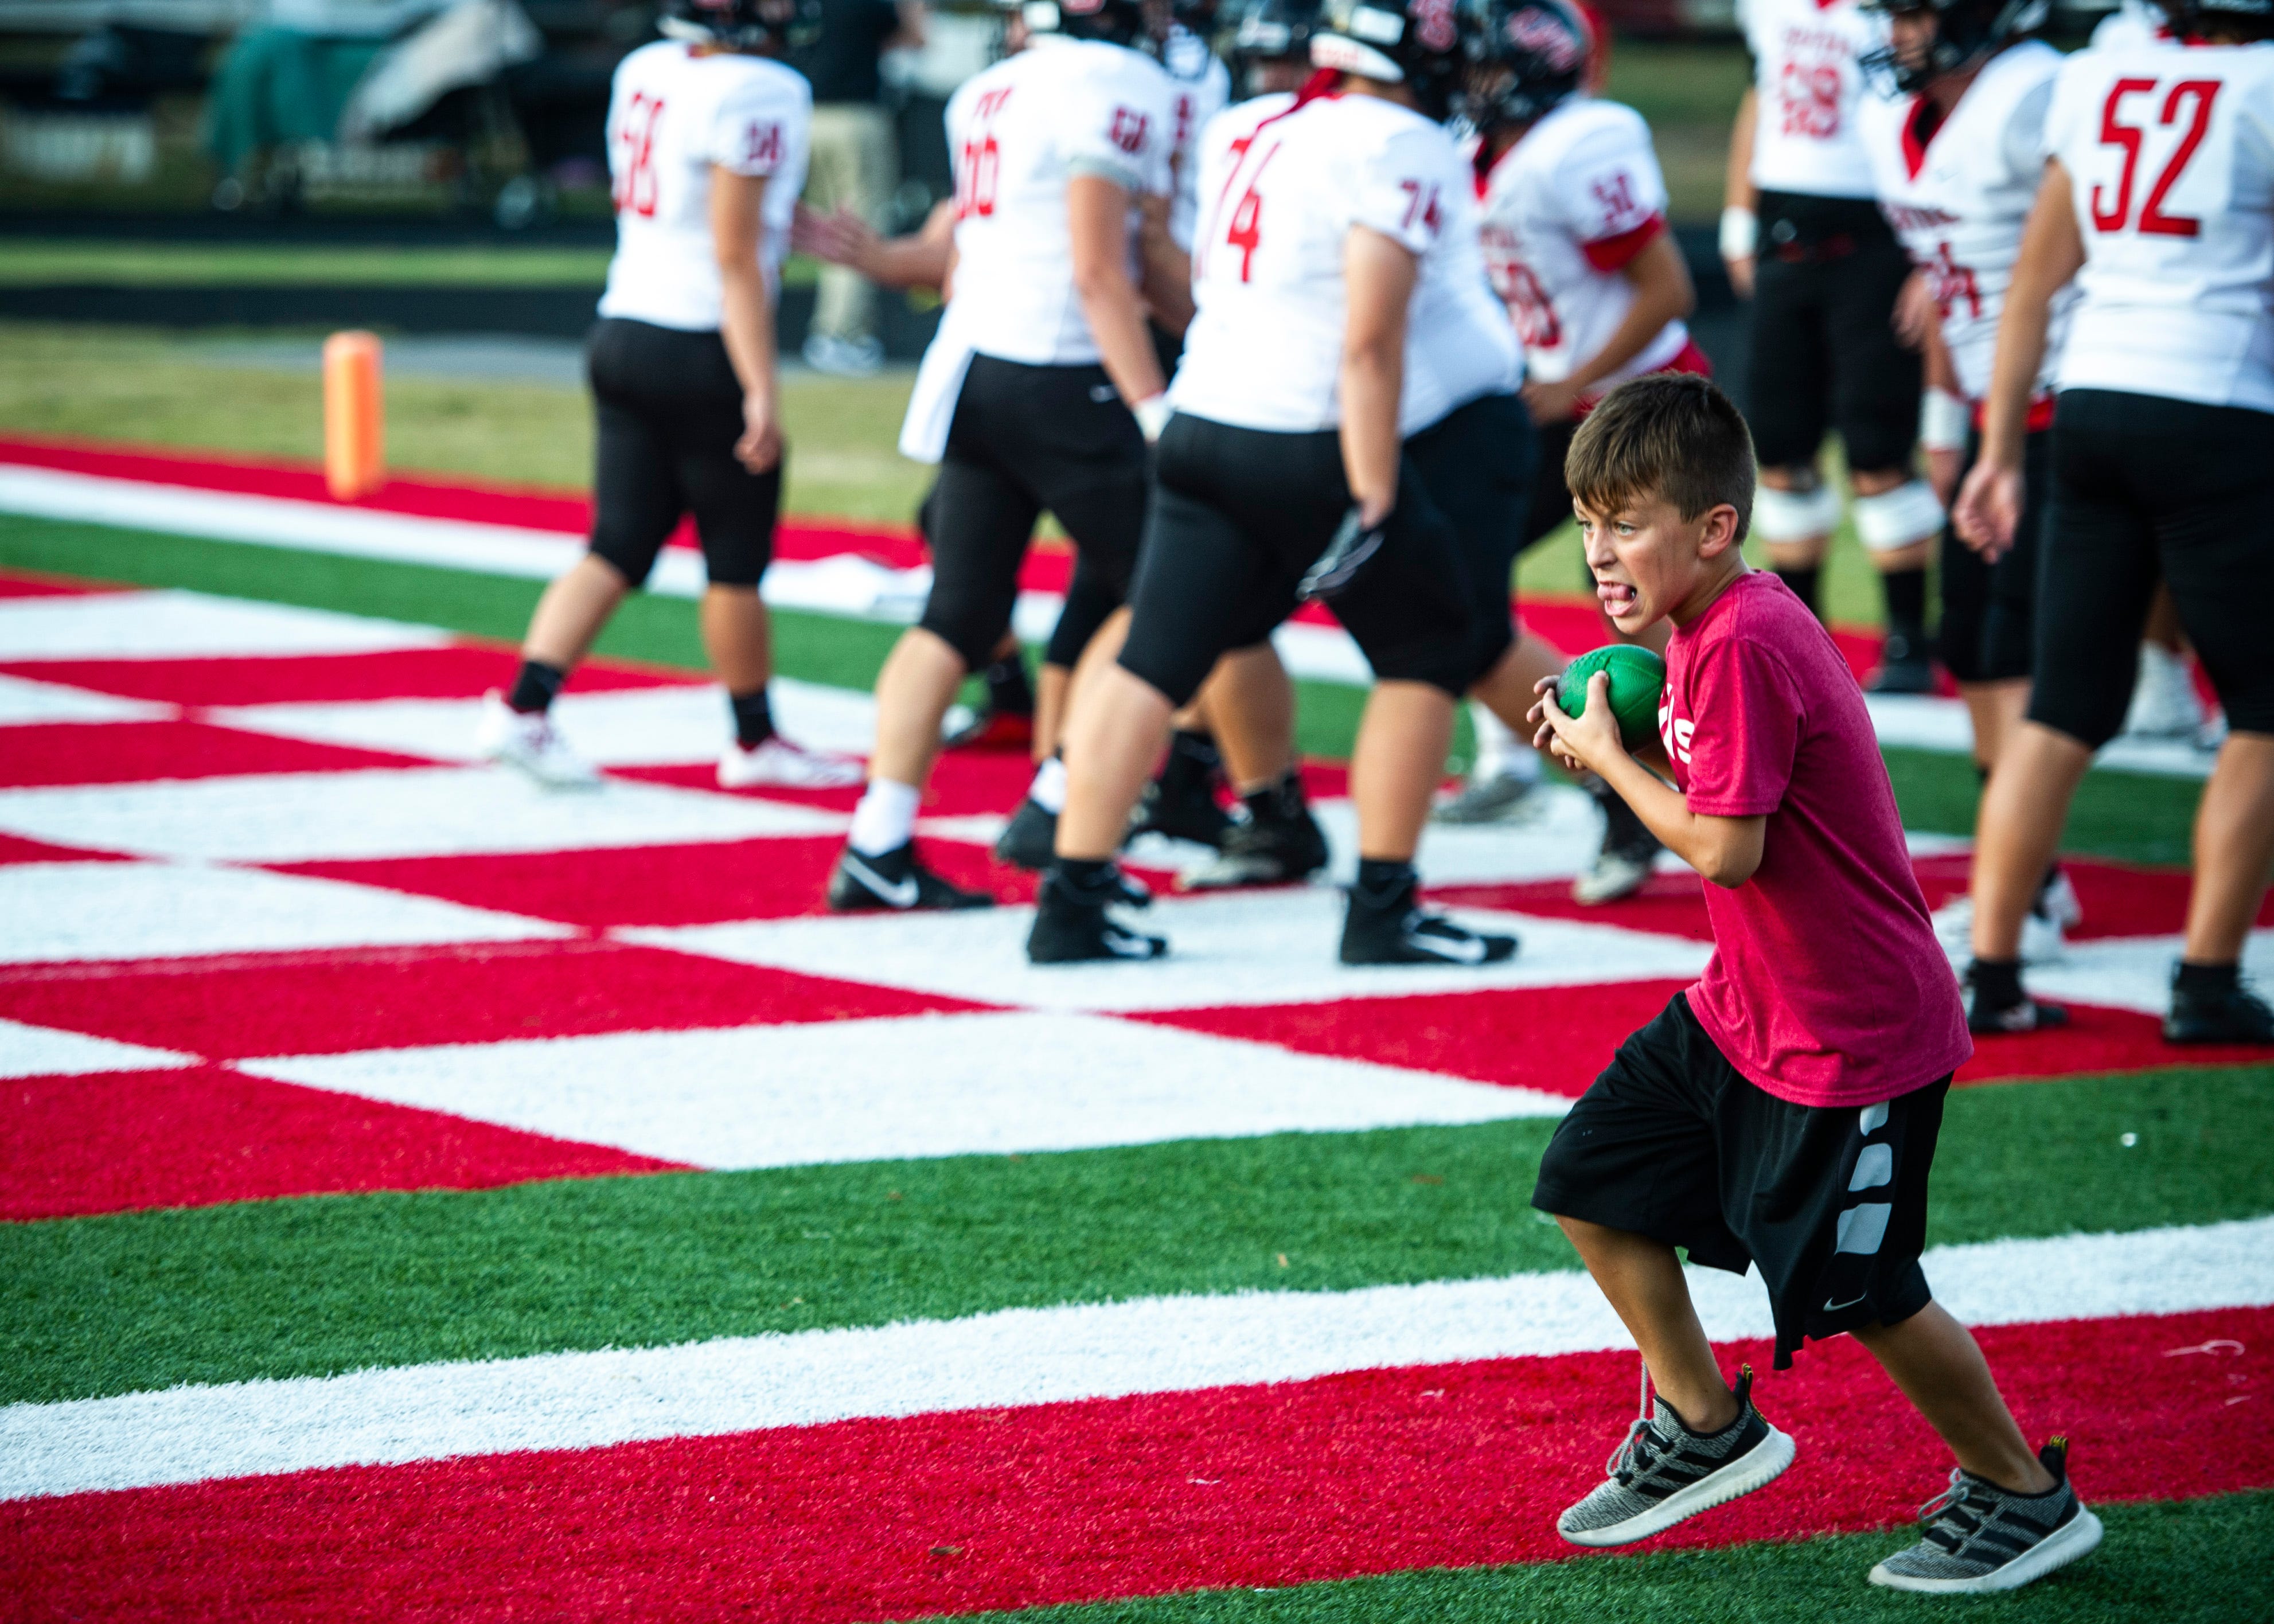 A ball boy runs the ball before the Halls and Central high school football game on Friday, October 4, 2019 at Halls High School.